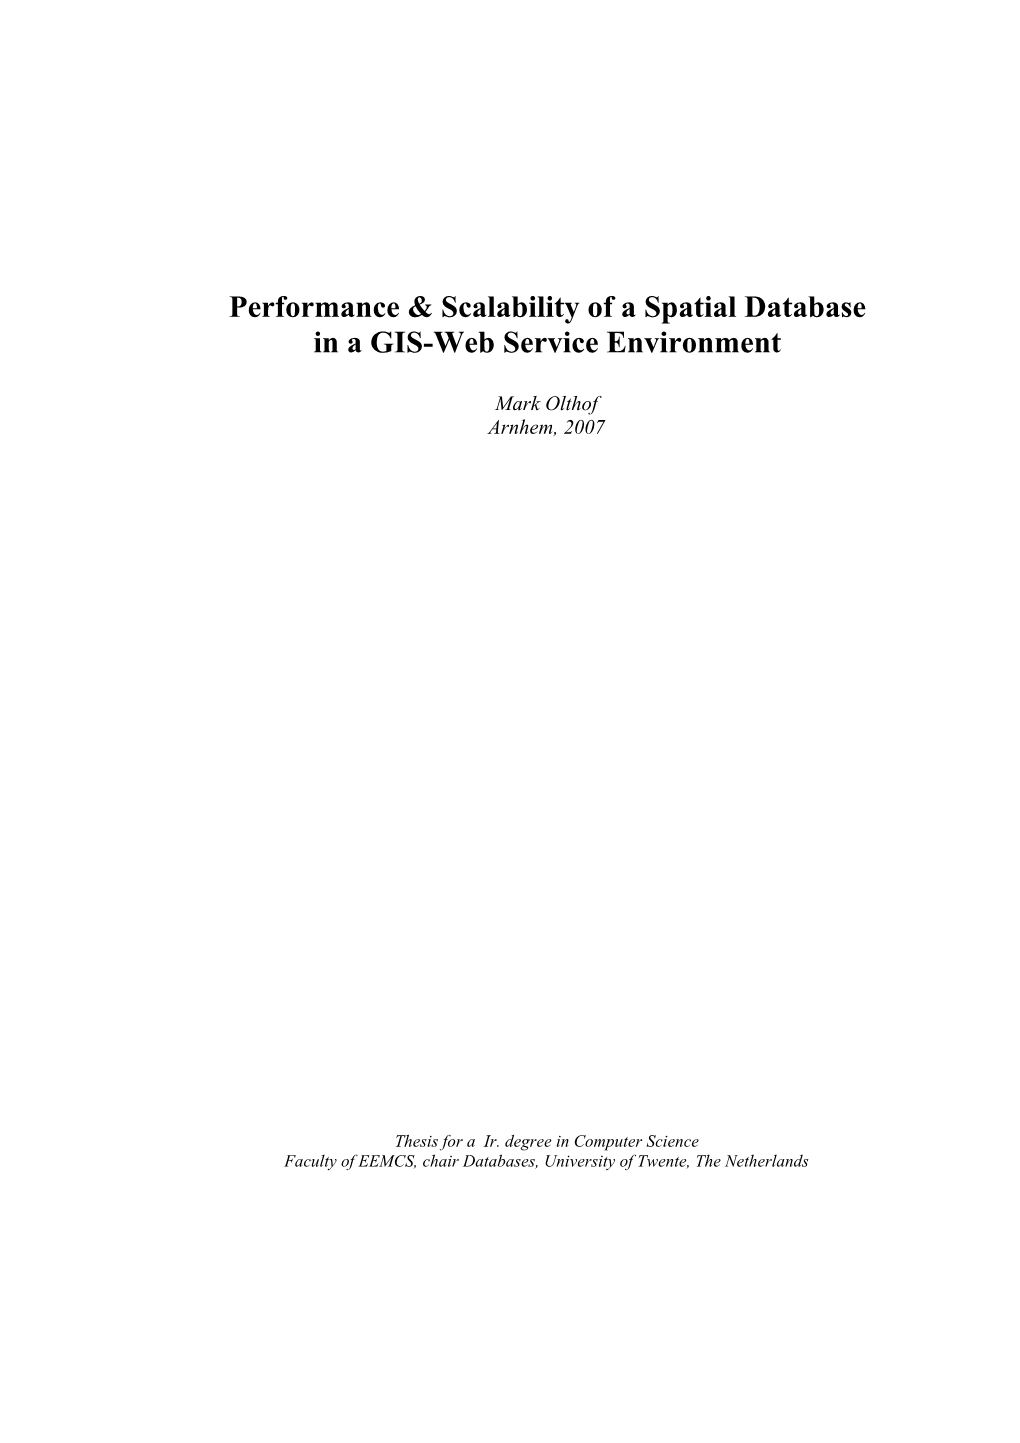 Performance & Scalability of a Spatial Database in a GIS-Web Service